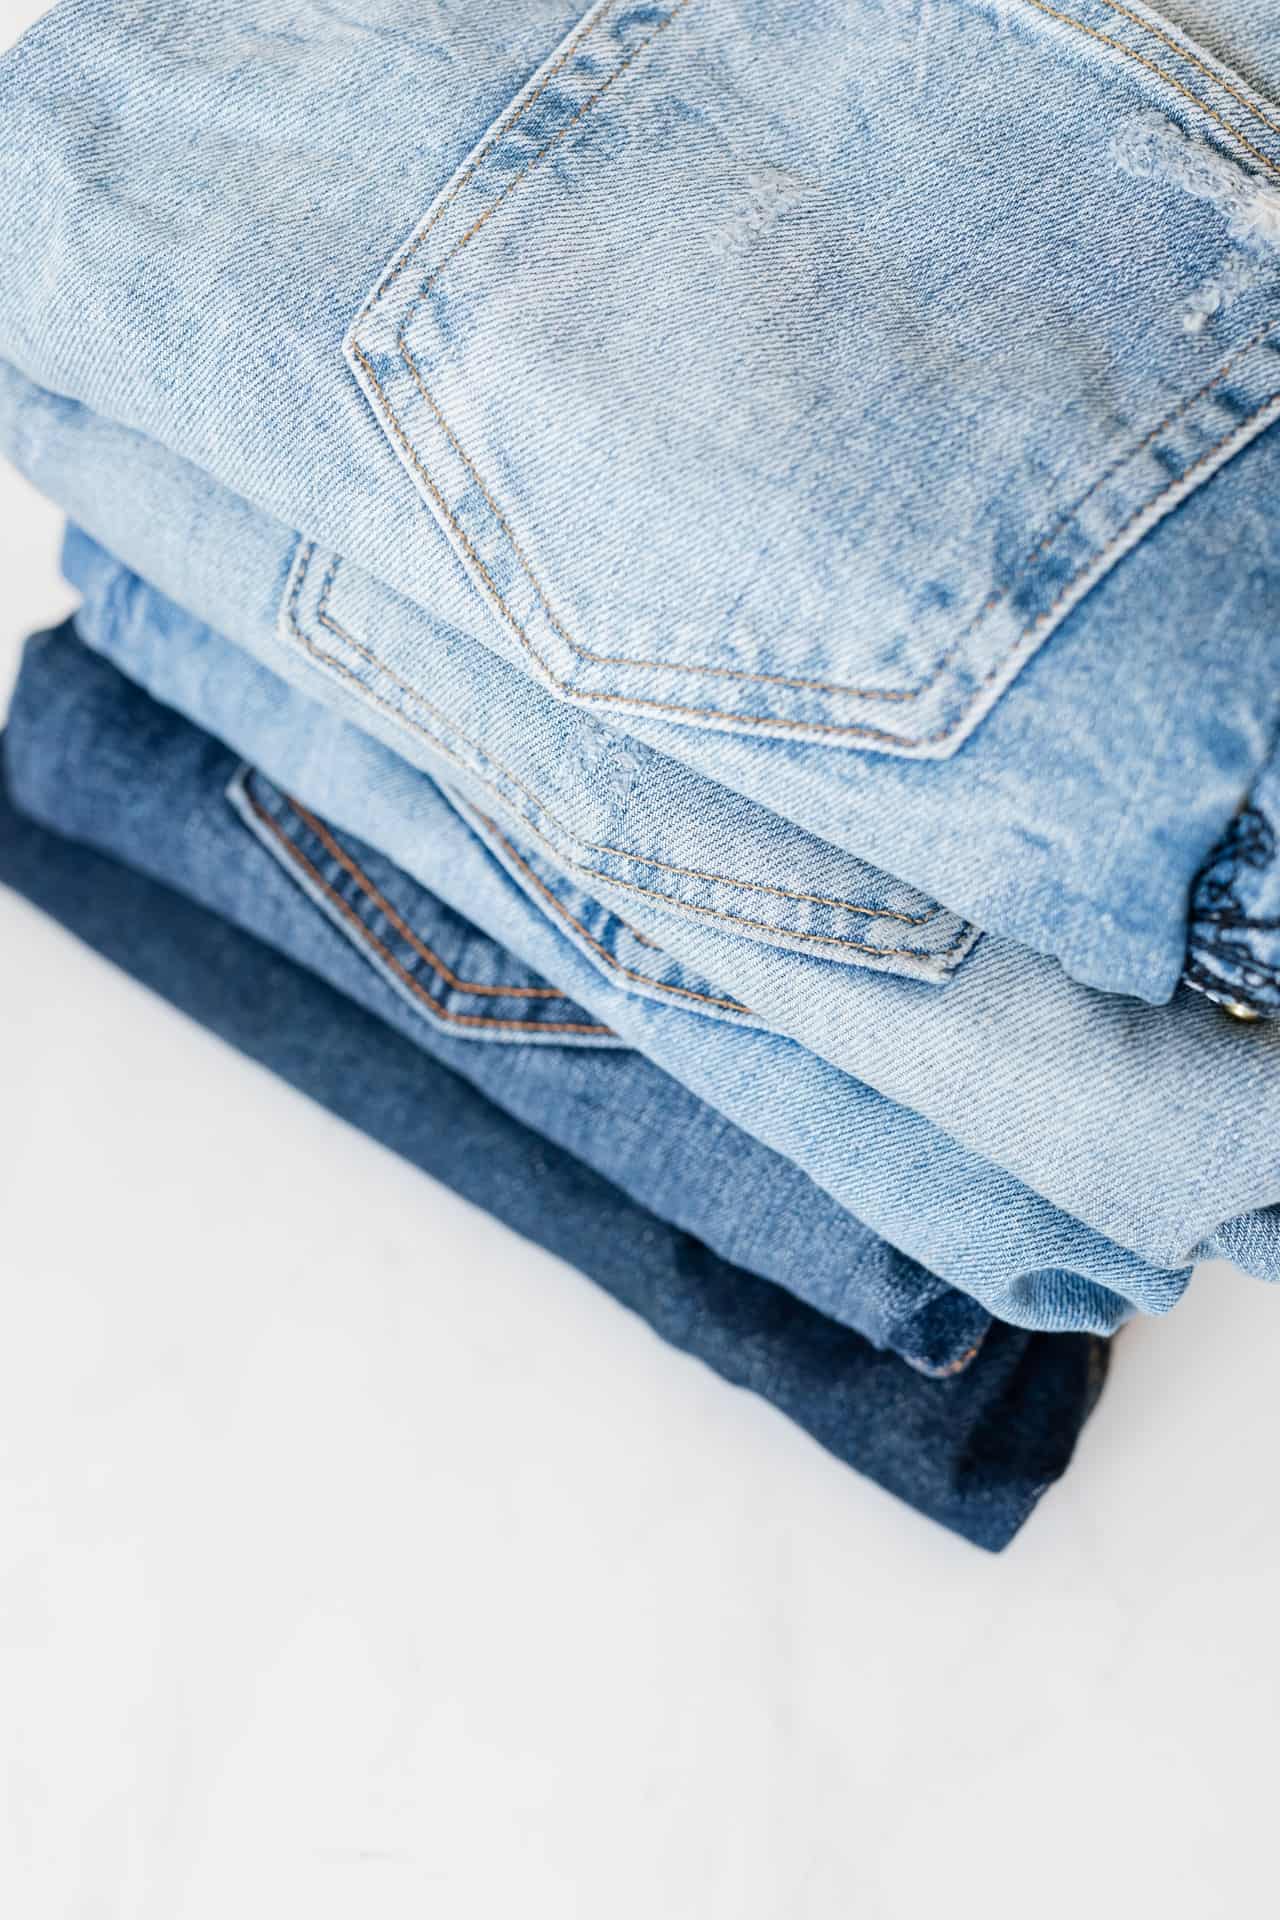 How should we take care of our jeans so that they will serve us in good condition for years?